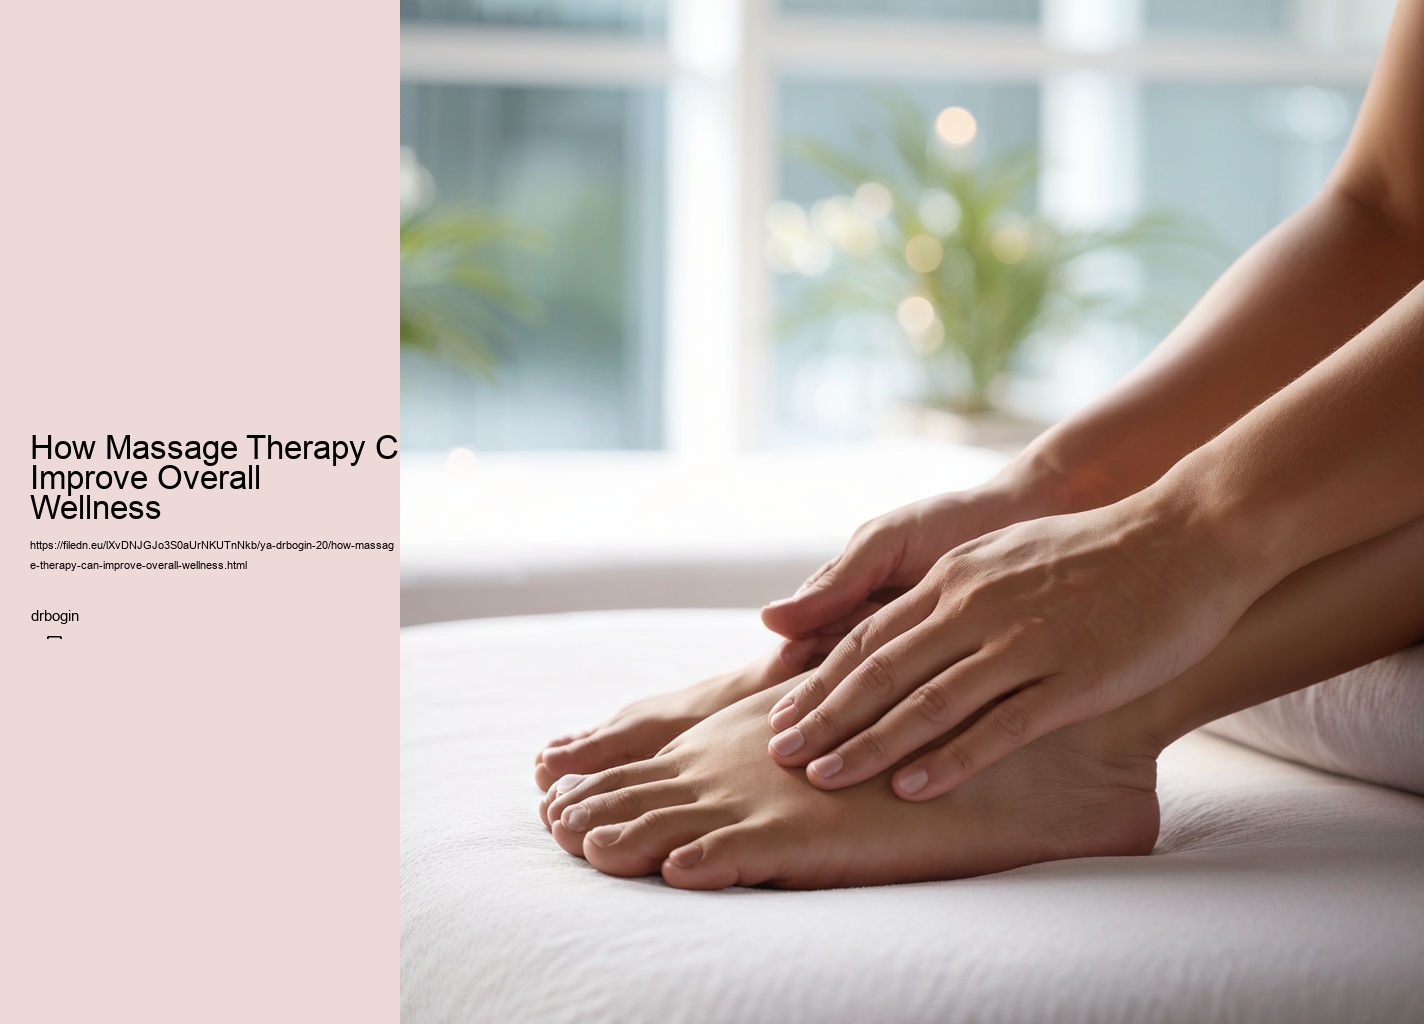 How Massage Therapy Can Improve Overall Wellness